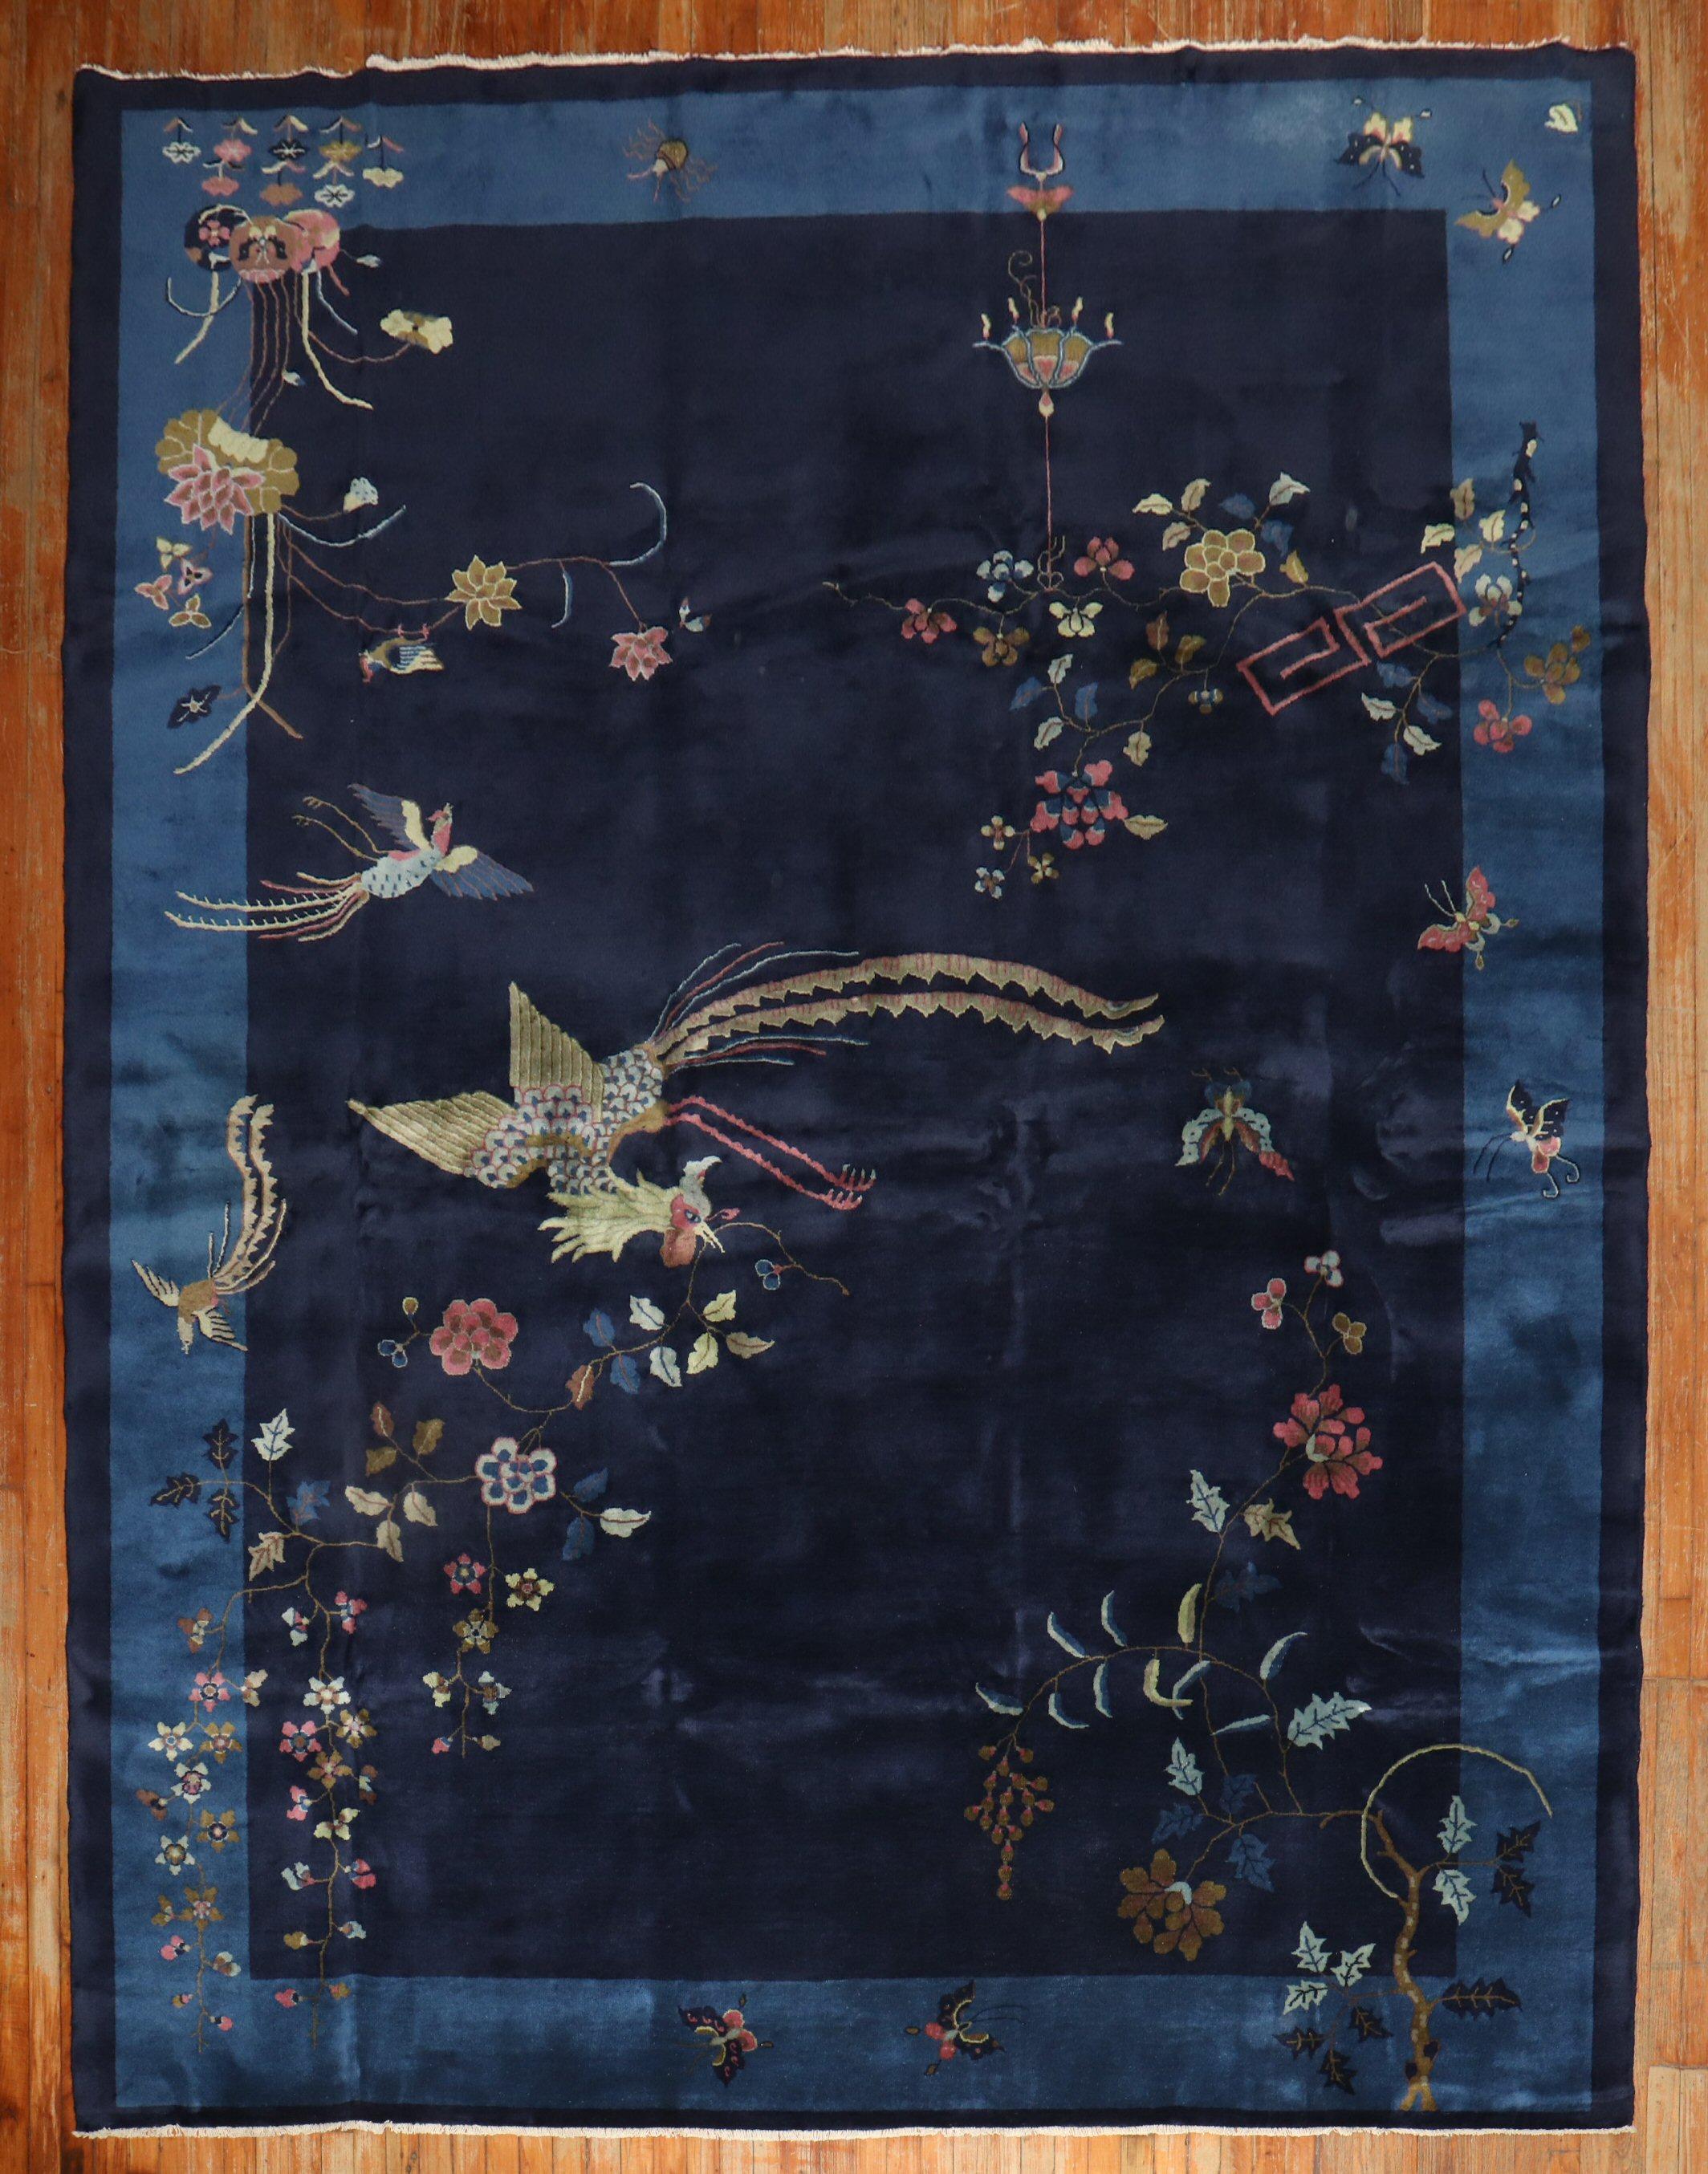 Elegant full pile antique Chinese Art Deco rug from the 1940's

Measures: 9' x 11'3''.